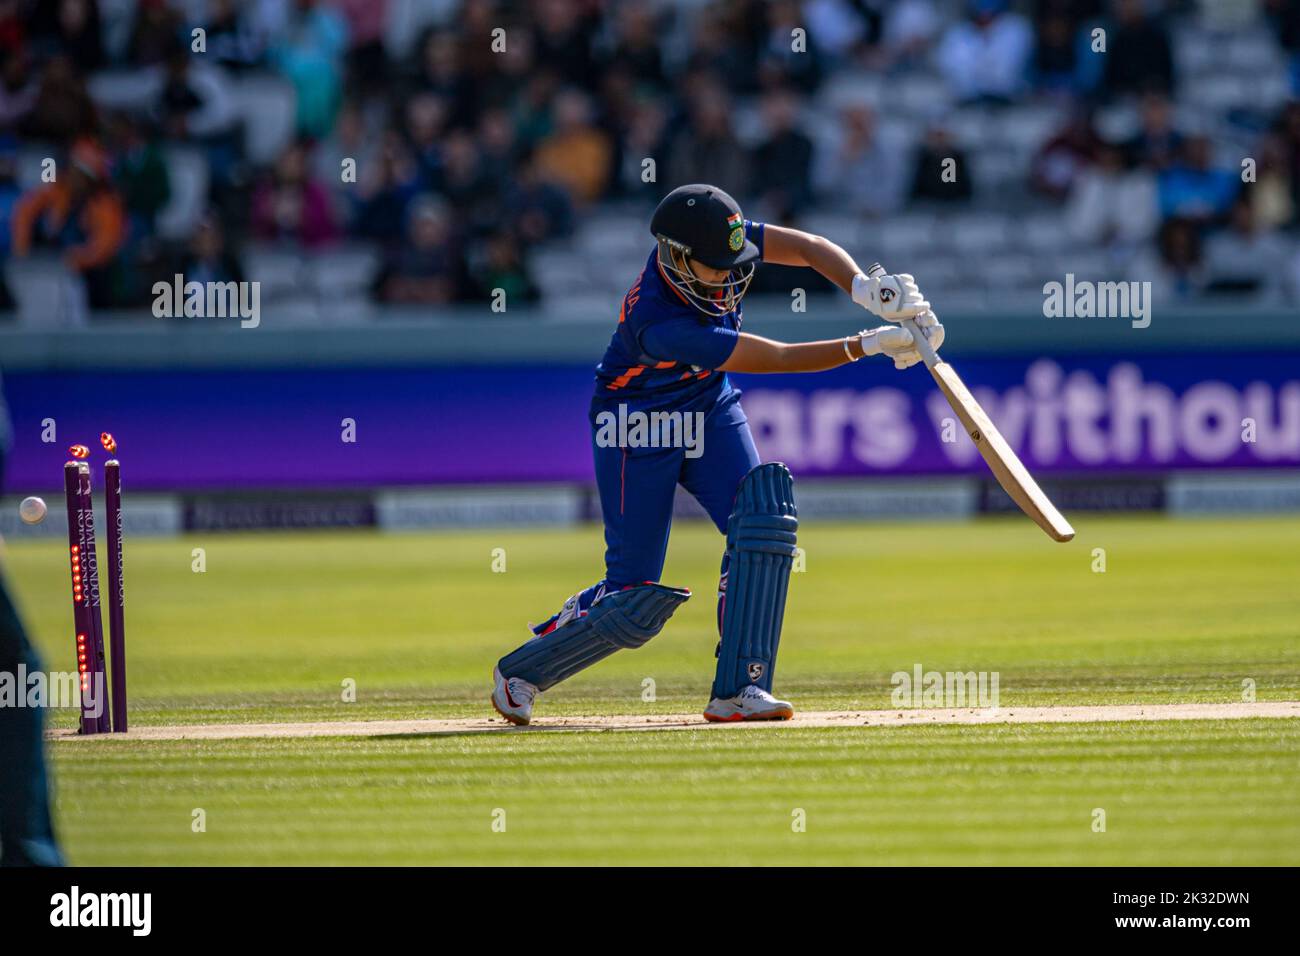 LONDON, UNITED KINGDOM. 24th September, 2022. in17 bowled byKate Cross of England during England Women vs India 3rd Royal London ODI at The Lord's Cricket Ground on Saturday, September 24, 2022 in LONDON ENGLAND.  Credit: Taka G Wu/Alamy Live News Stock Photo